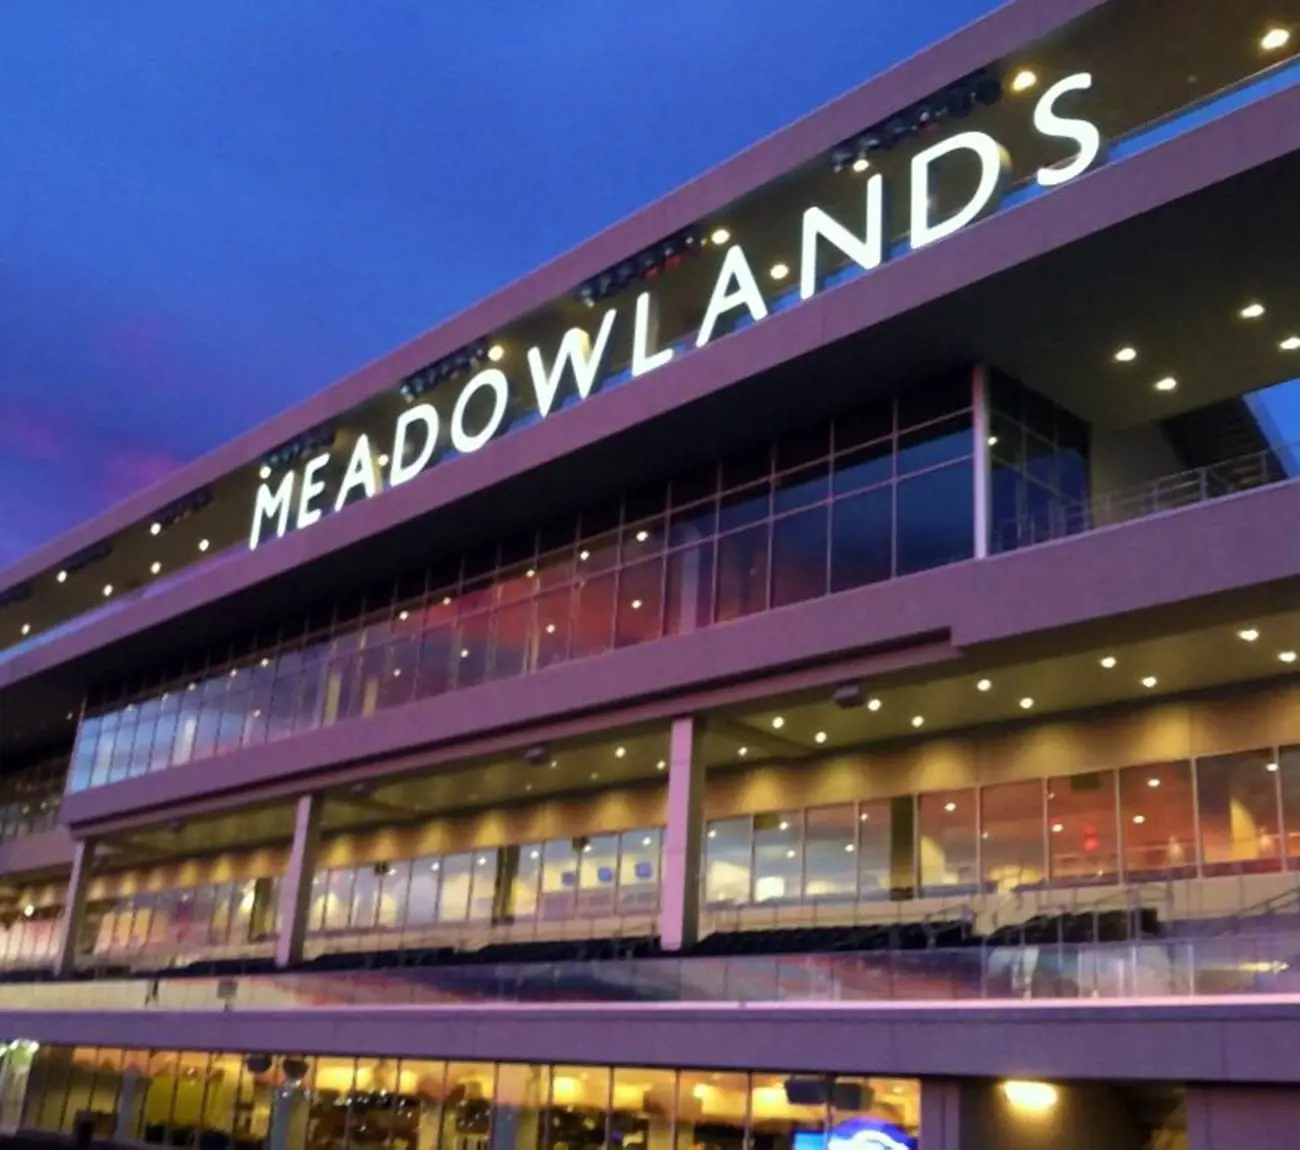 Meadowlands-scaled